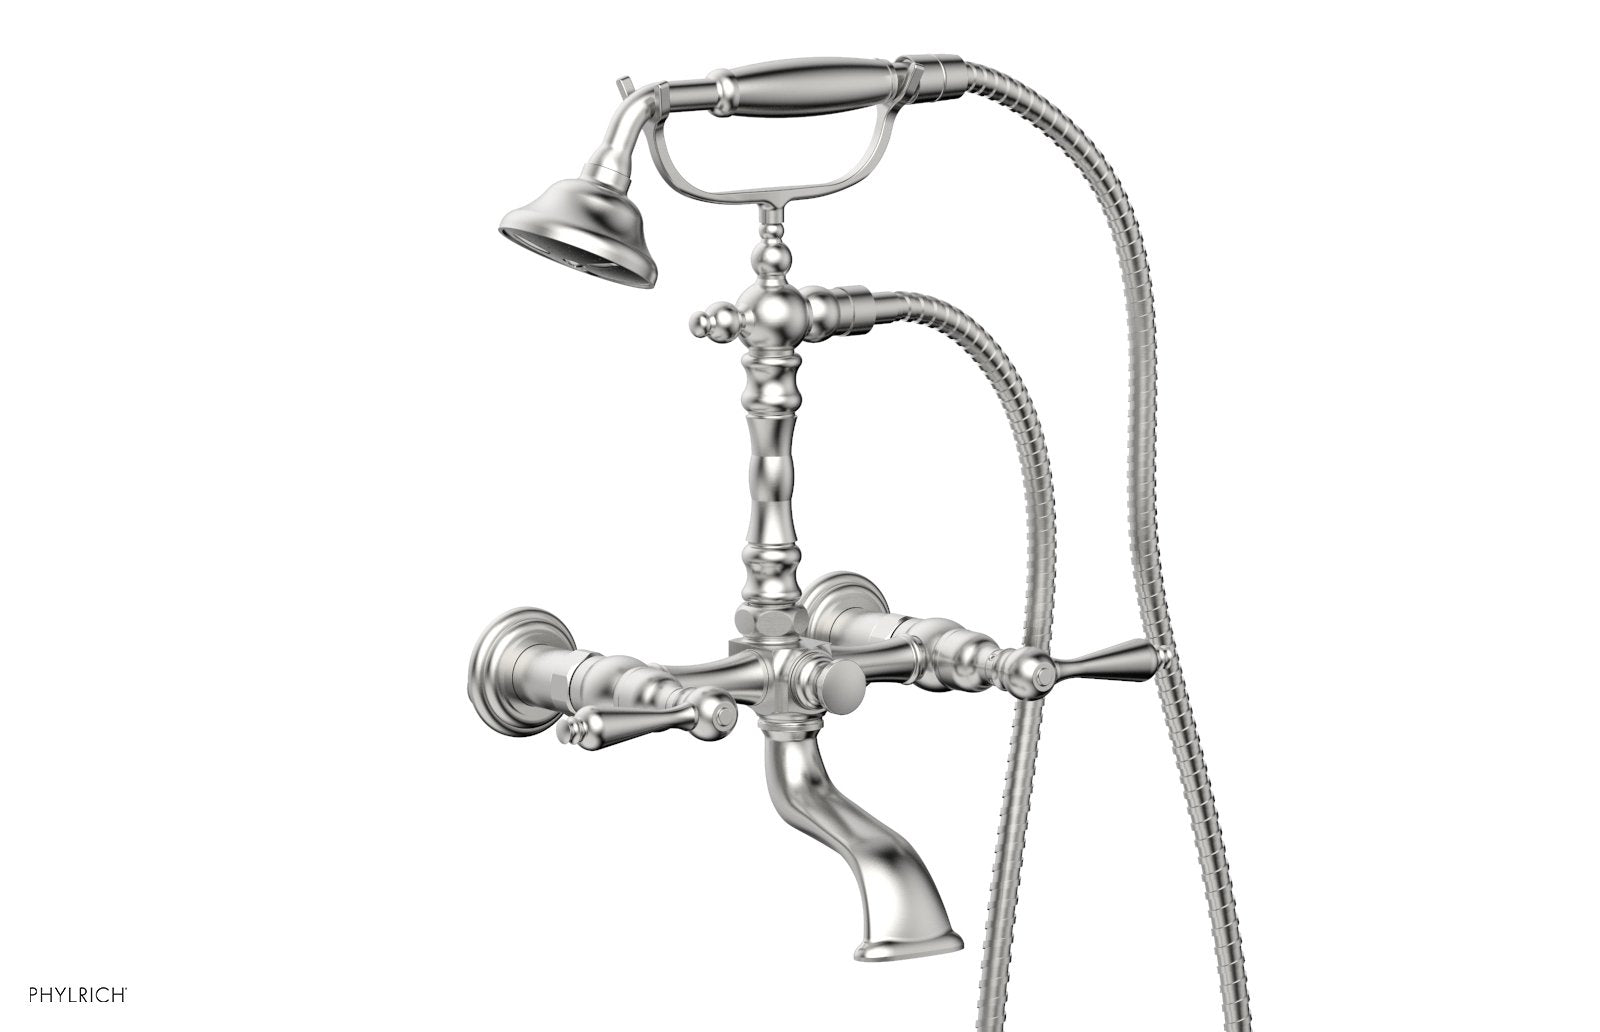 Phylrich REVERE & SAVANNAH Exposed Tub & Hand Shower - Lever Handle